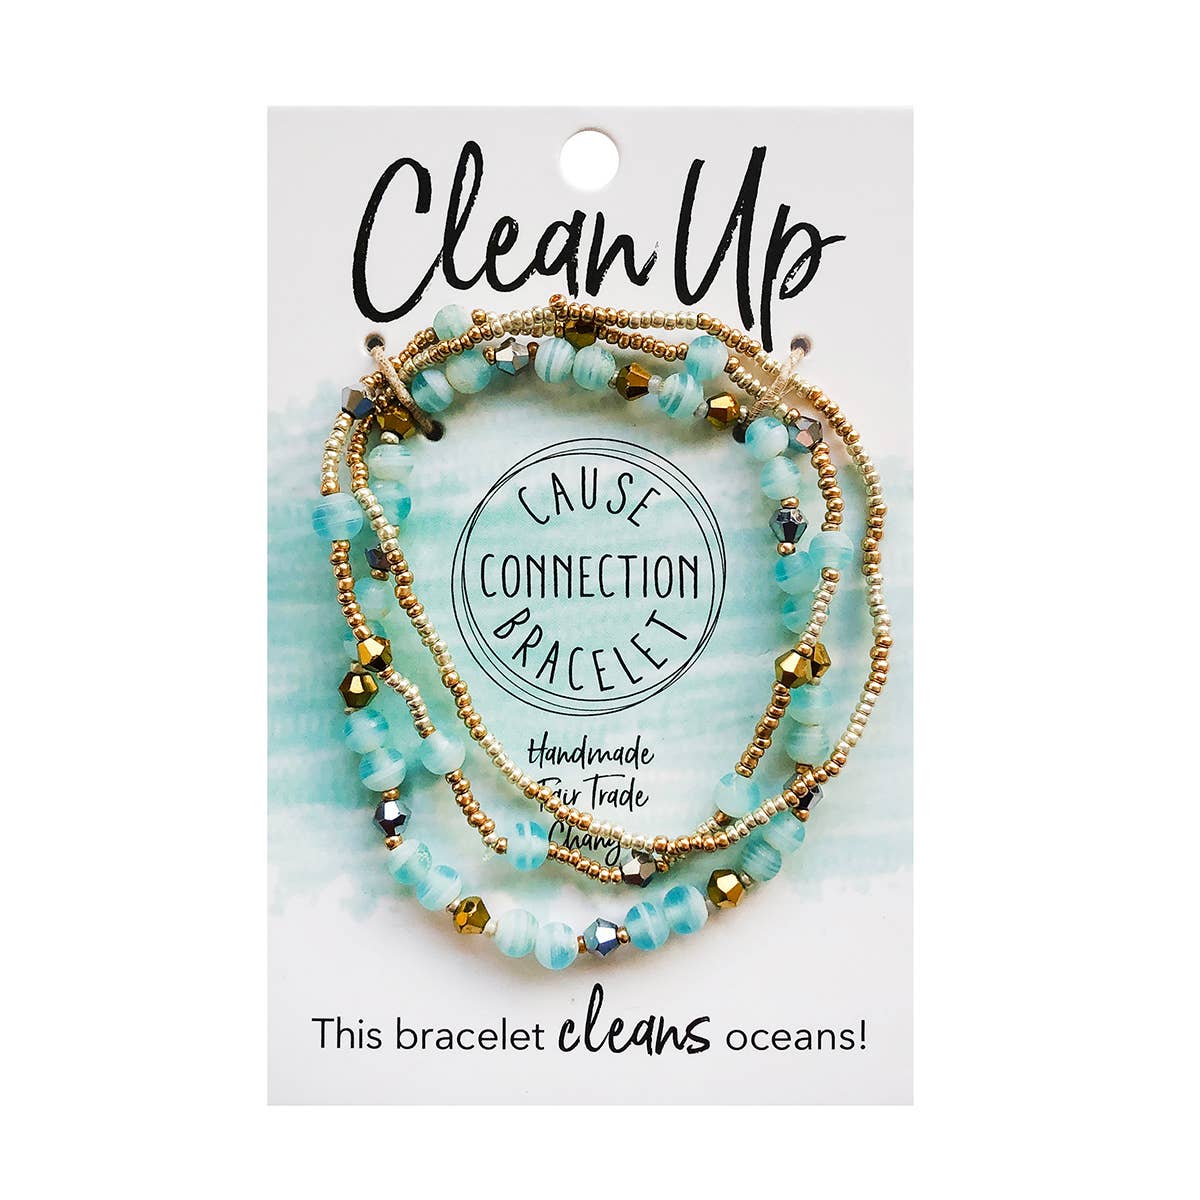 Cause Connection Bracelet - Clean Up The Oceans